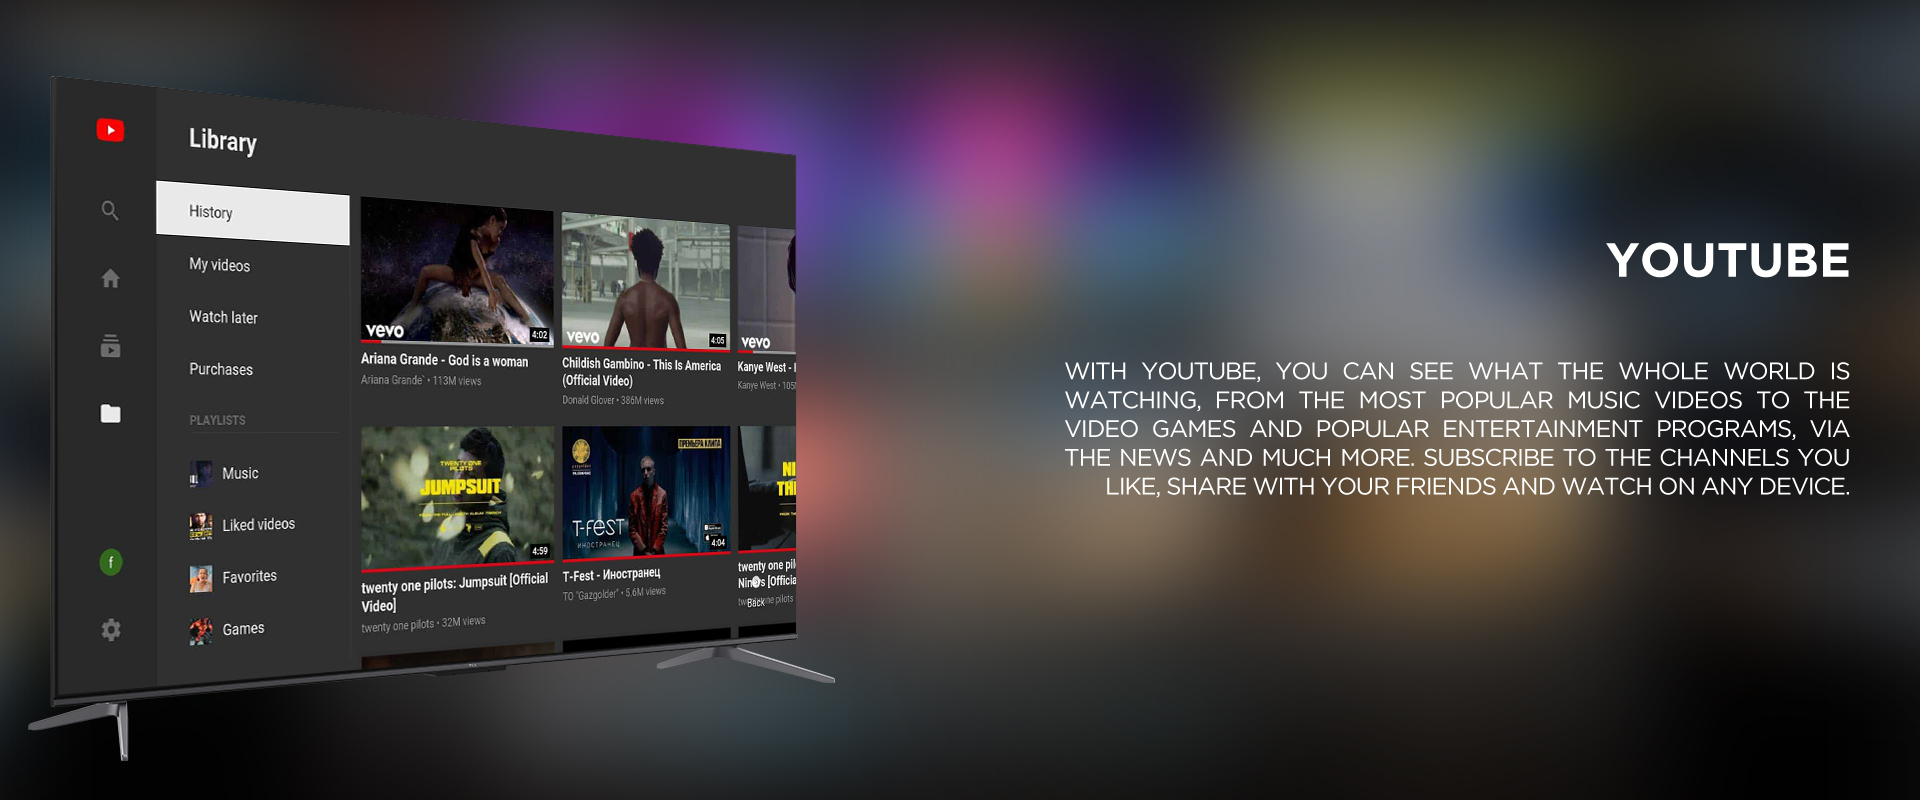 YOUTUBE - WITH YOUTUBE, YOU CAN SEE WHAT THE WHOLE WORLD IS WATCHING, FROM THE MOST POPULAR MUSIC VIDEOS TO THE VIDEO GAMES AND POPULAR ENTERTAINMENT PROGRAMS, VIA THE NEWS AND MUCH MORE. SUBSCRIBE TO THE CHANNELS YOU LIKE, SHARE WITH YOUR FRIENDS AND WATCH ON ANY DEVICE.